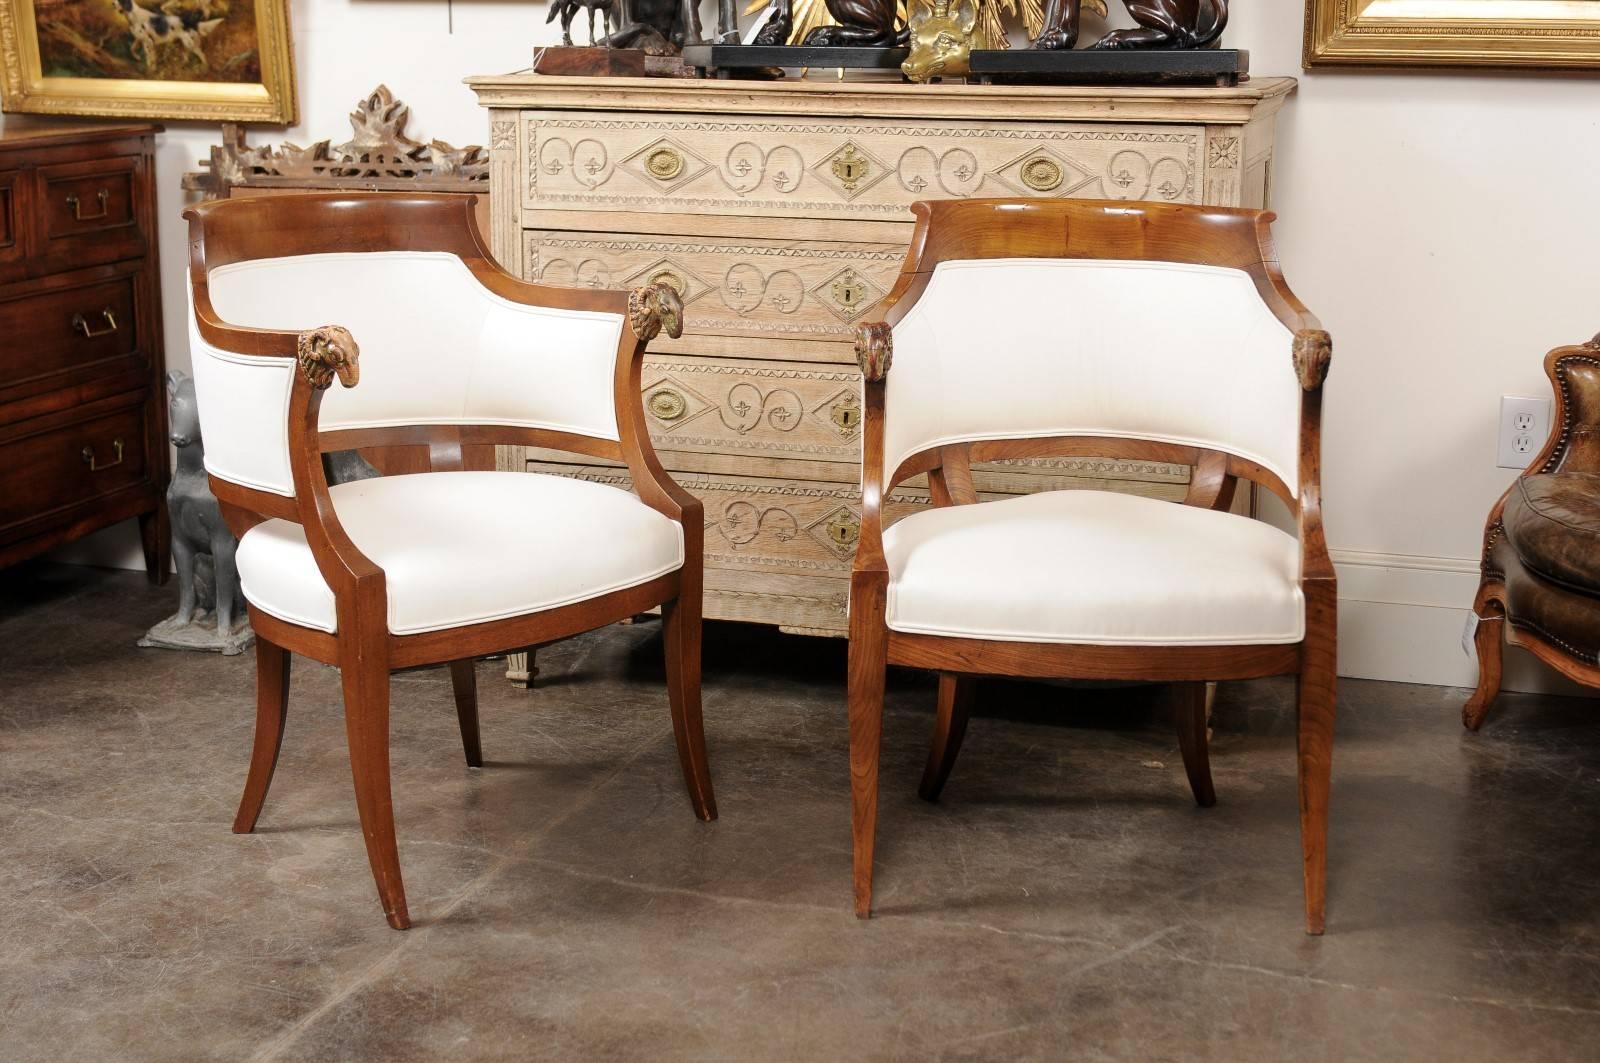 This pair of Austrian Biedermeier armchairs from the mid-19th century features upholstered barrel backs adorned with exquisite carved ram's heads on the arms. Skillfully depicted with great details, these are the only decorative accents that the